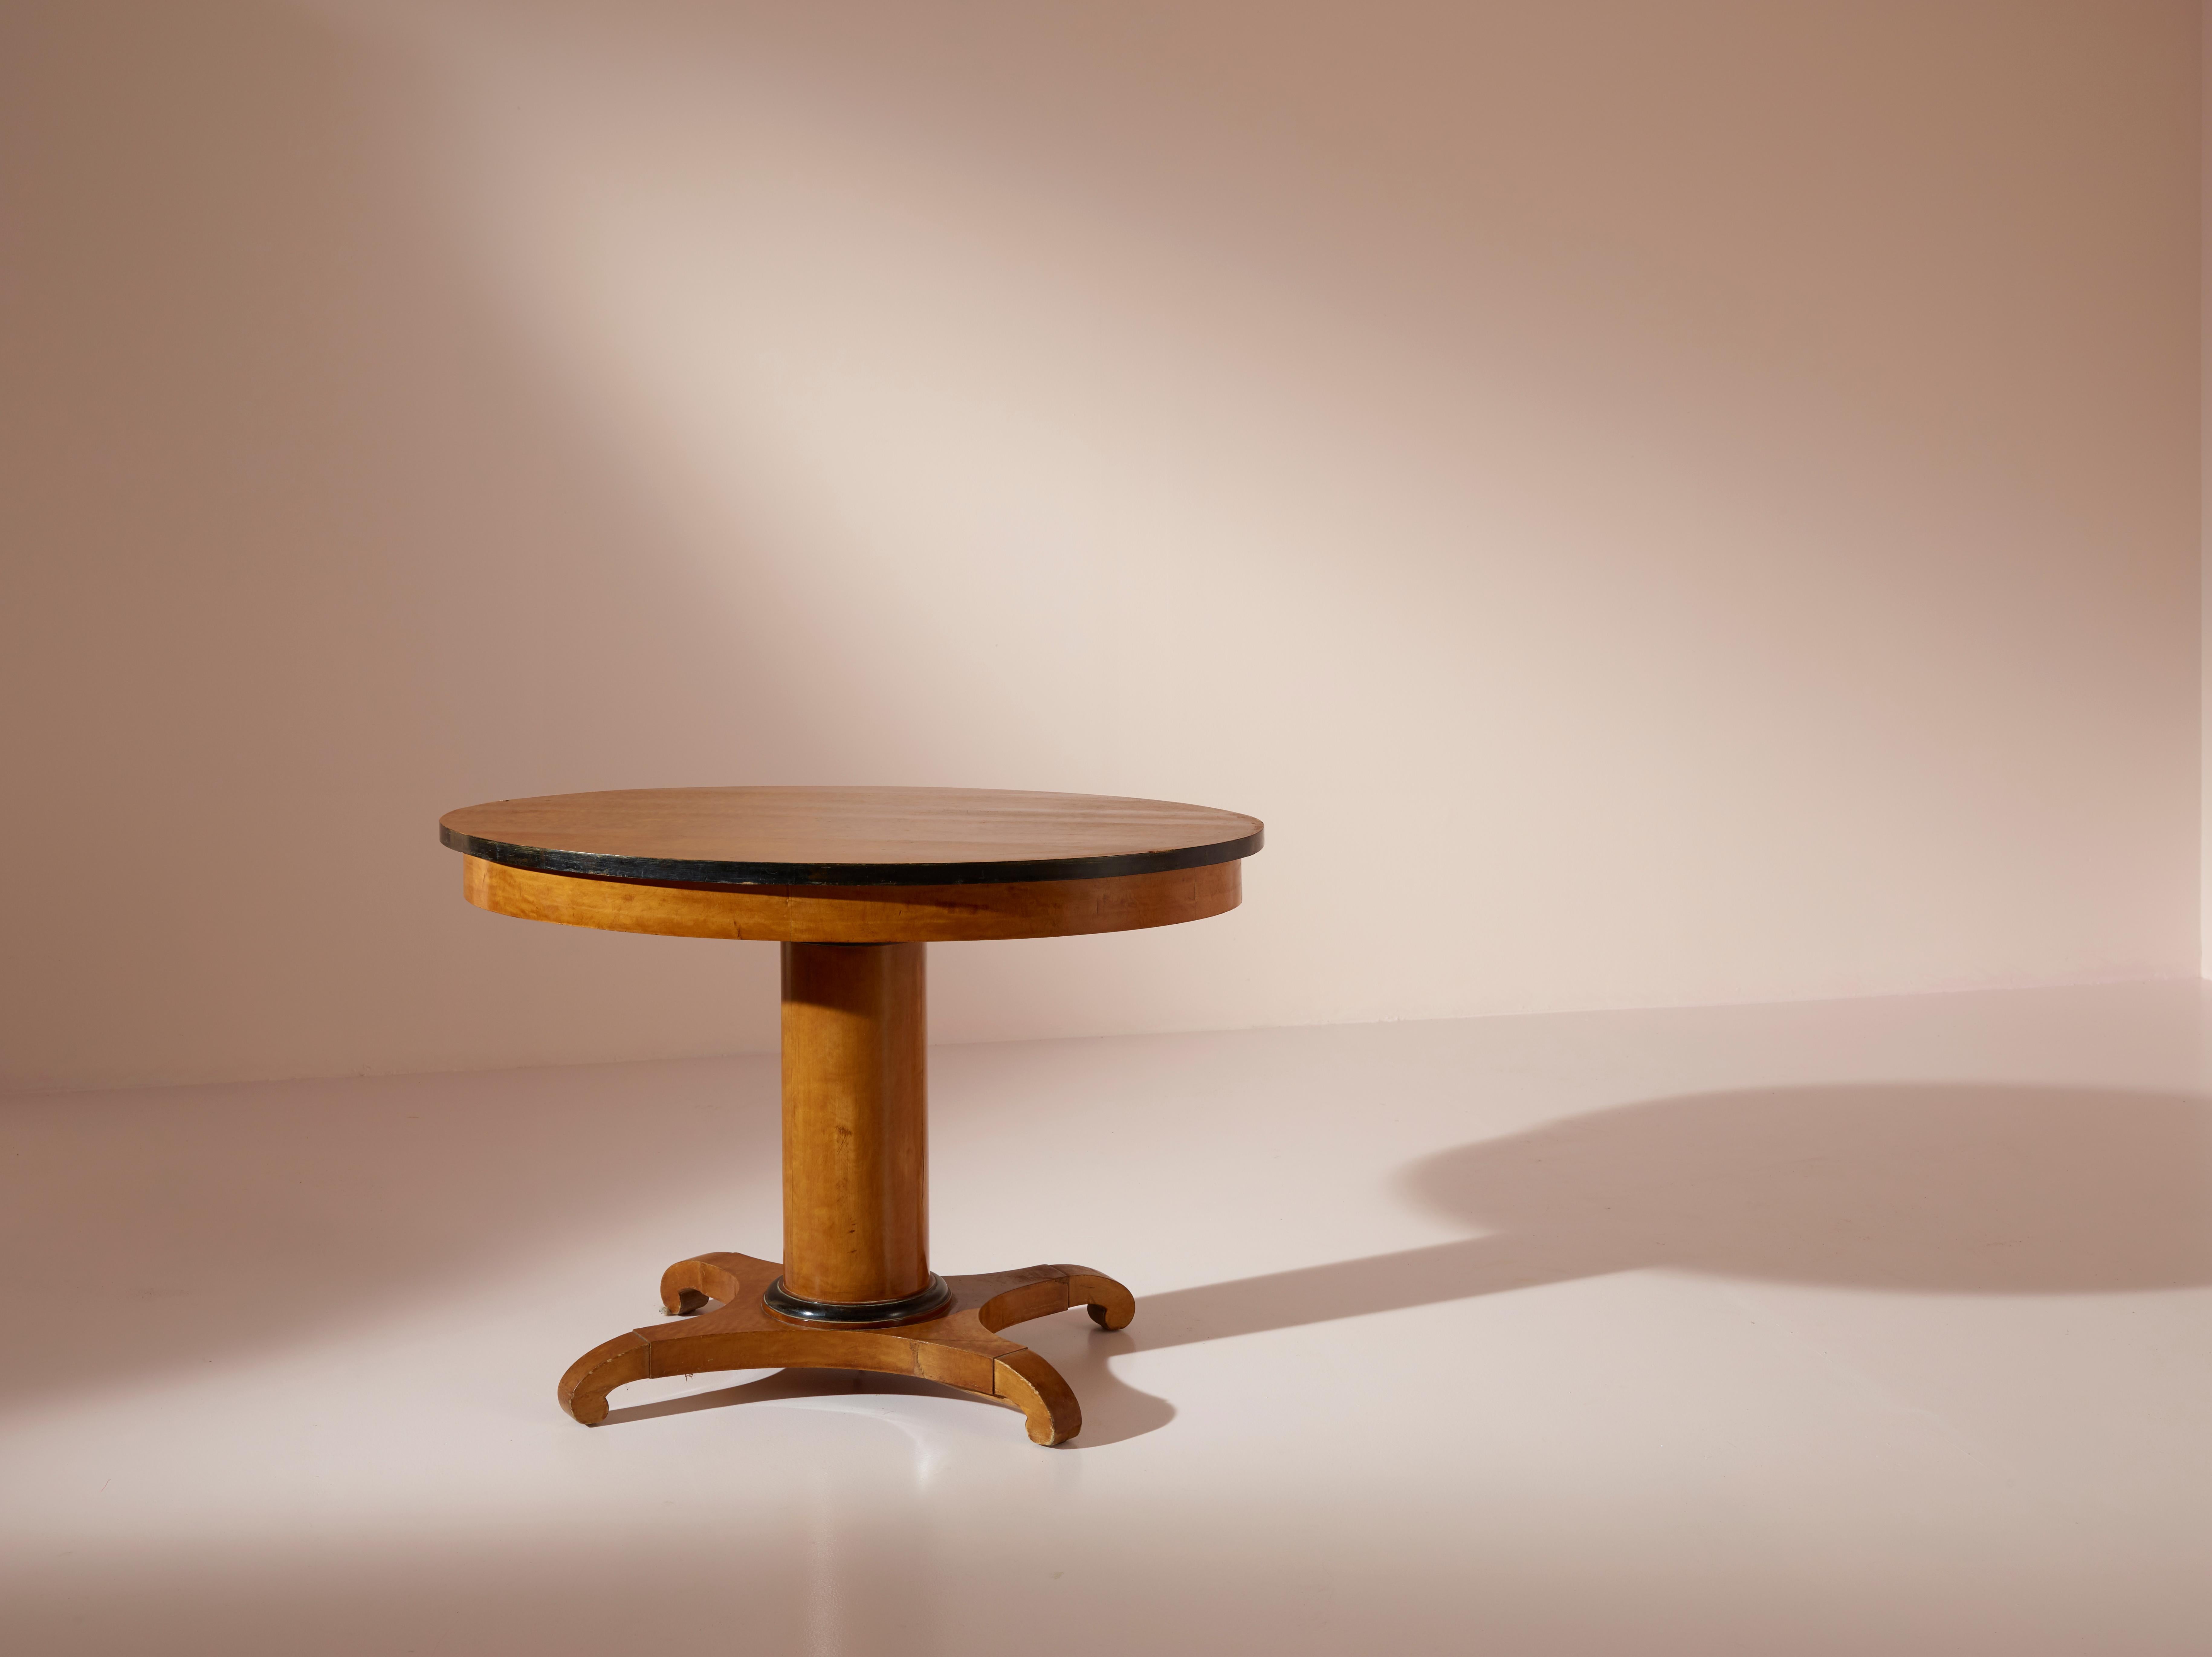 An elegant Biedermeier occasional table, produced in Europe during the 1920s, beautifully captures the essence of this timeless style. Crafted from maple wood, adorned with exquisite ebonised details, this piece showcases the impeccable